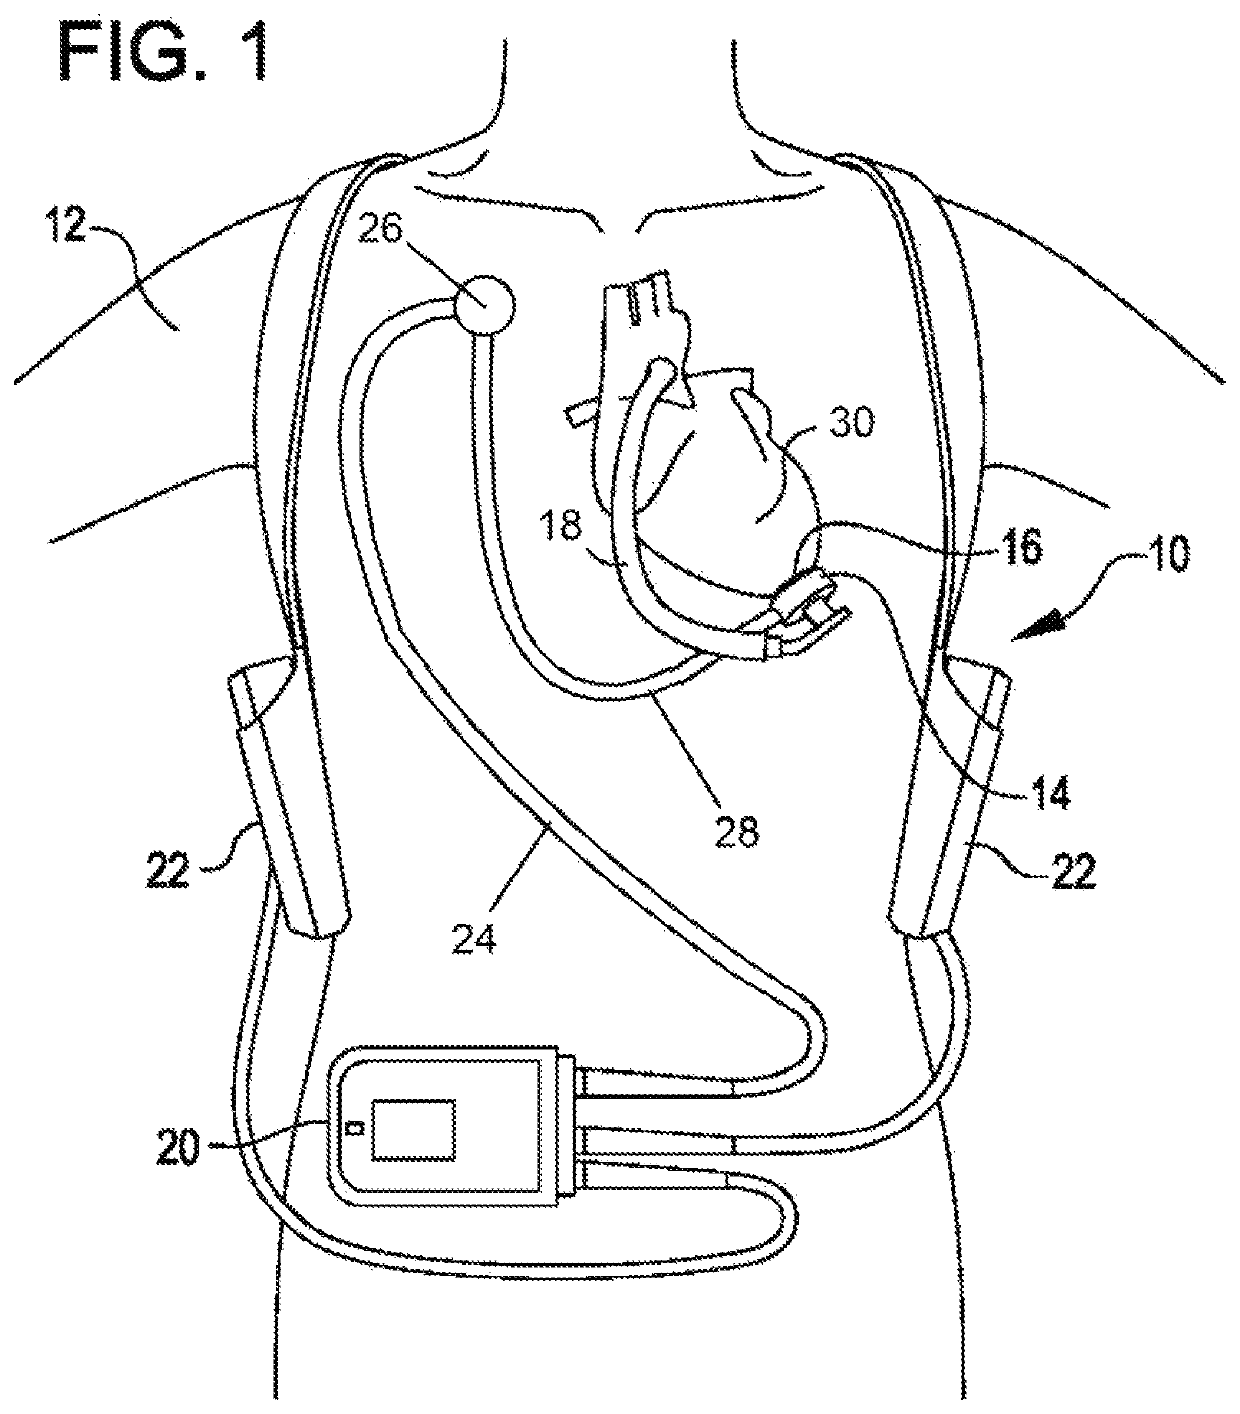 Prosthetic rib with integrated percutaneous connector for ventricular assist devices